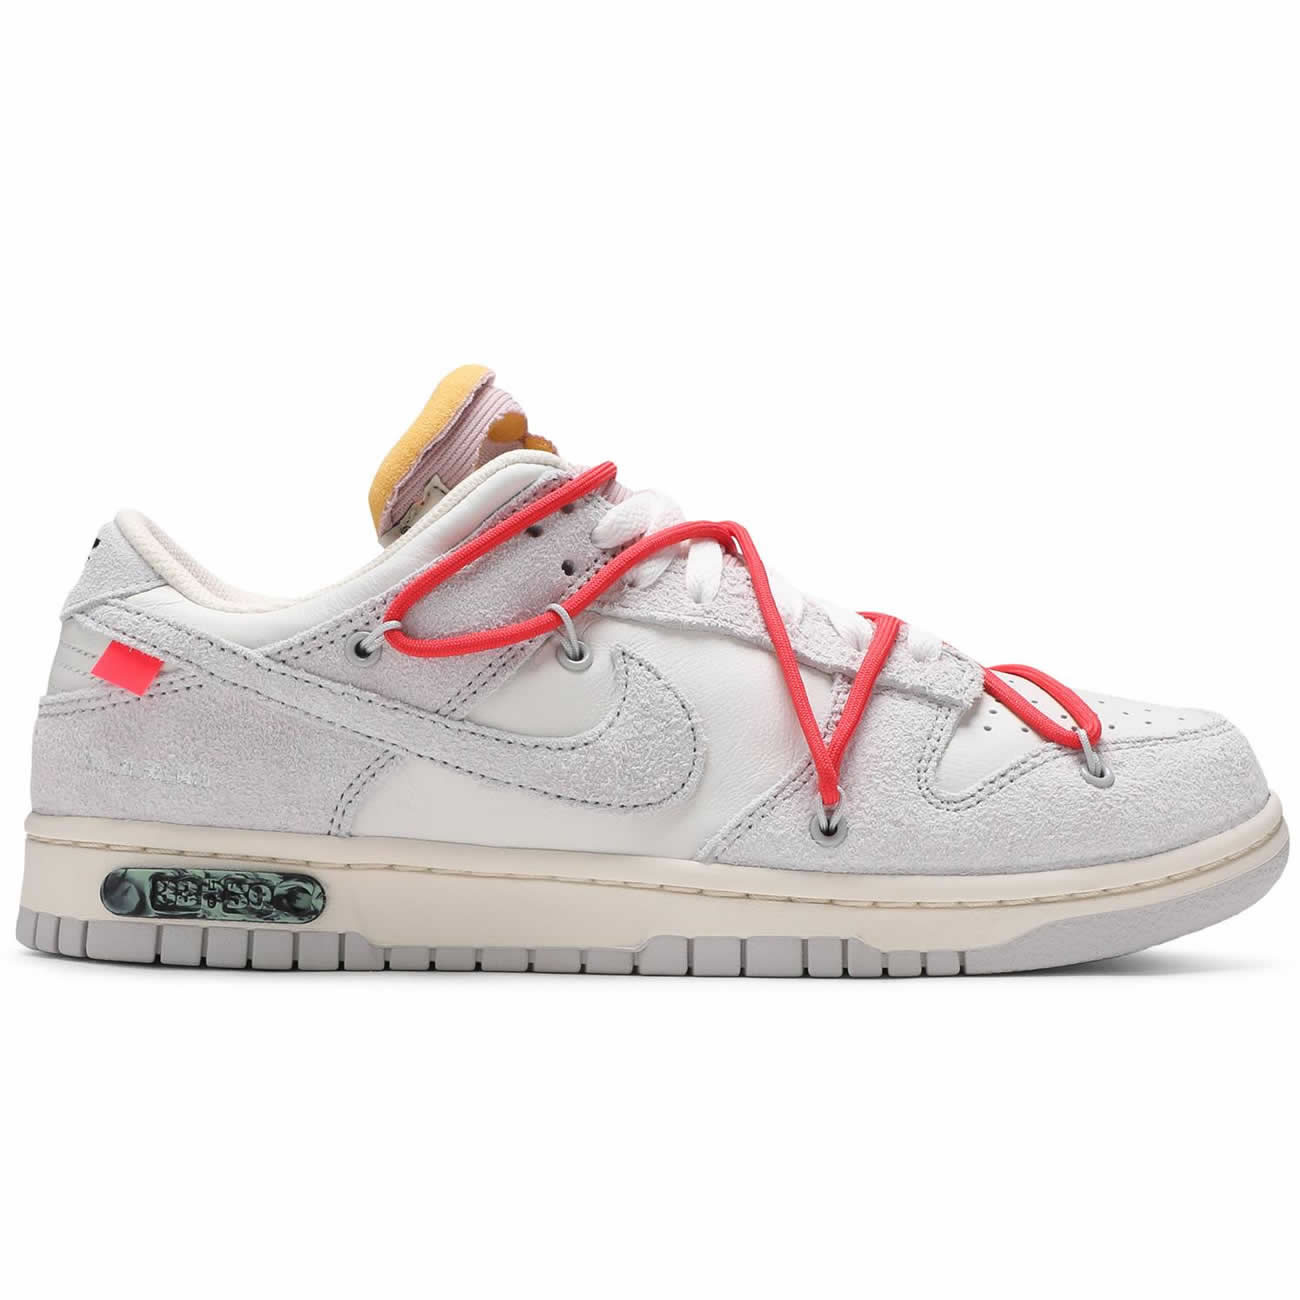 Off White Nike Sb Dunk Low Lot 33 Of 50 Sail Neutral Grey Chile Red Dj0950 118 (2) - newkick.org